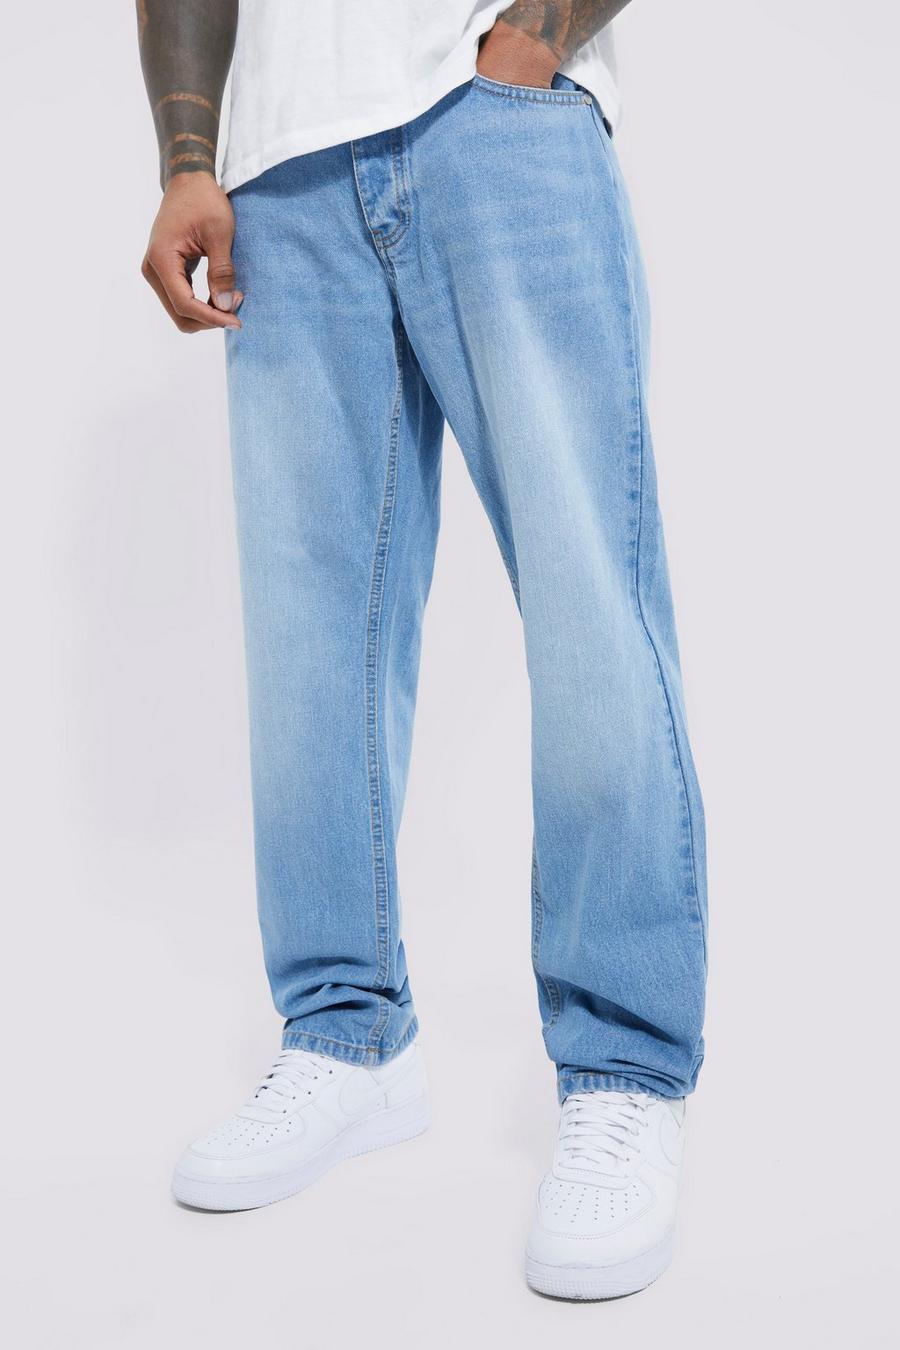 Men's Baggy Jeans | Men's Loose Fitting Jeans | boohoo